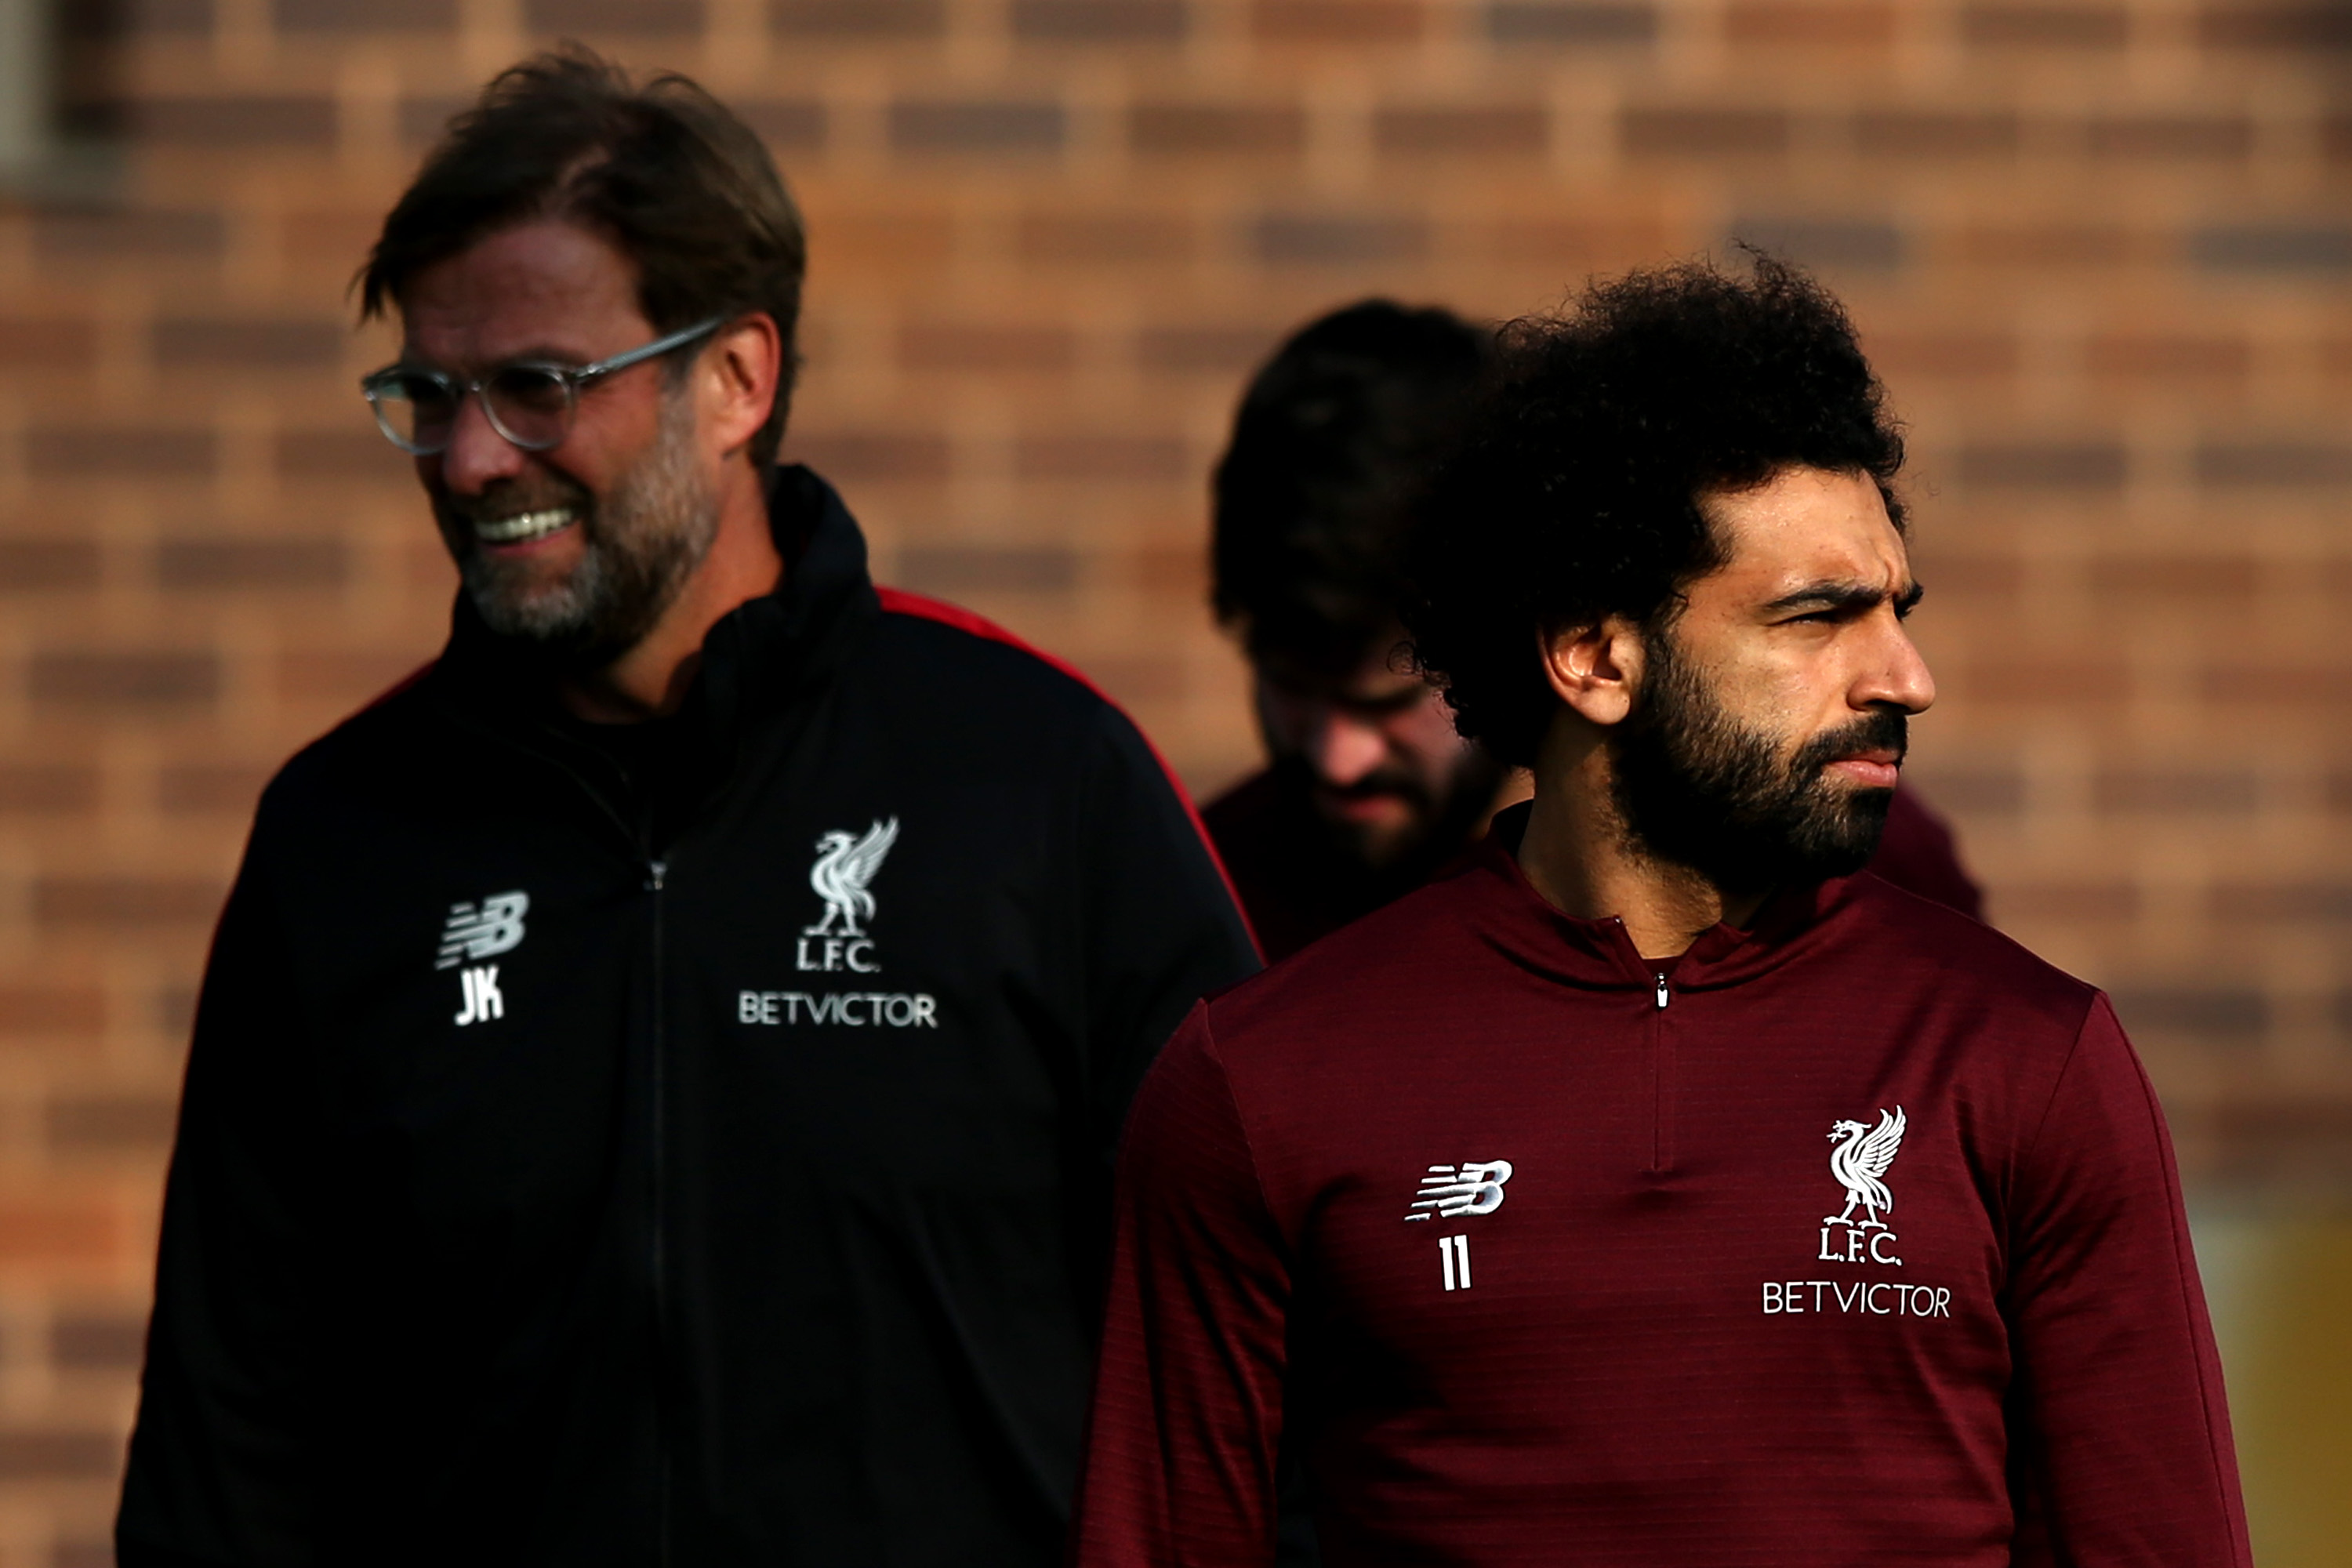 LIVERPOOL, ENGLAND - APRIL 08: Mohamed Salah and Jurgen Klopp, Manager of Liverpool during a Liverpool training session ahead of their UEFA Champions League quarter-final match against FC Porto. At Melwood Training Ground on April 08, 2019 in Liverpool, England. (Photo by Jan Kruger/Getty Images)